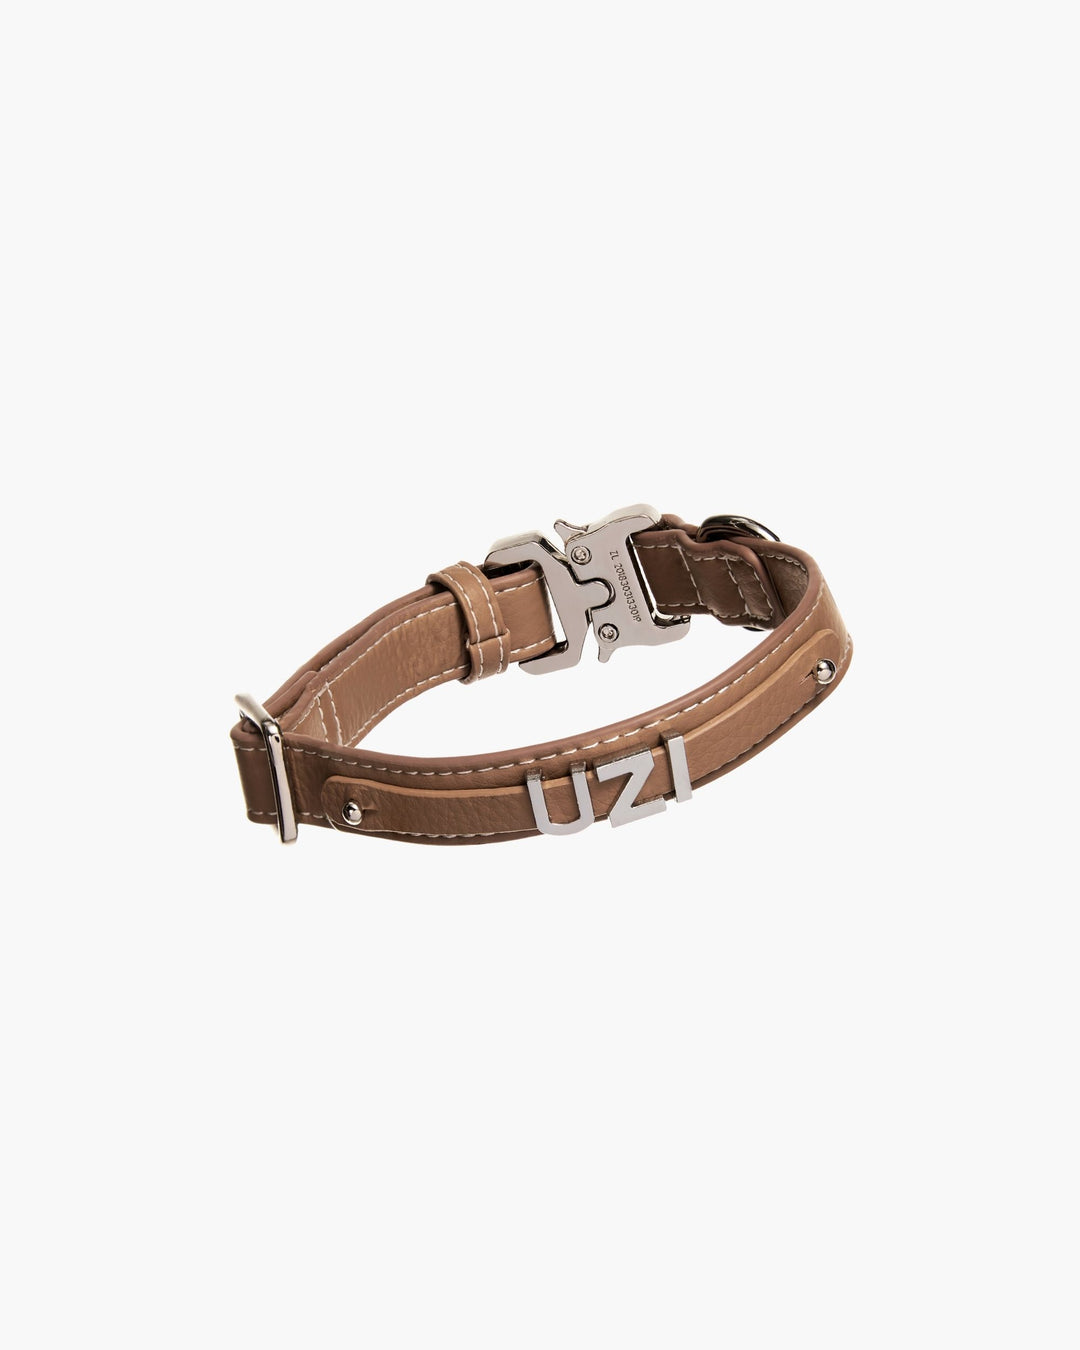 STRAY-ED Signature Dog Collar with letters- Tan